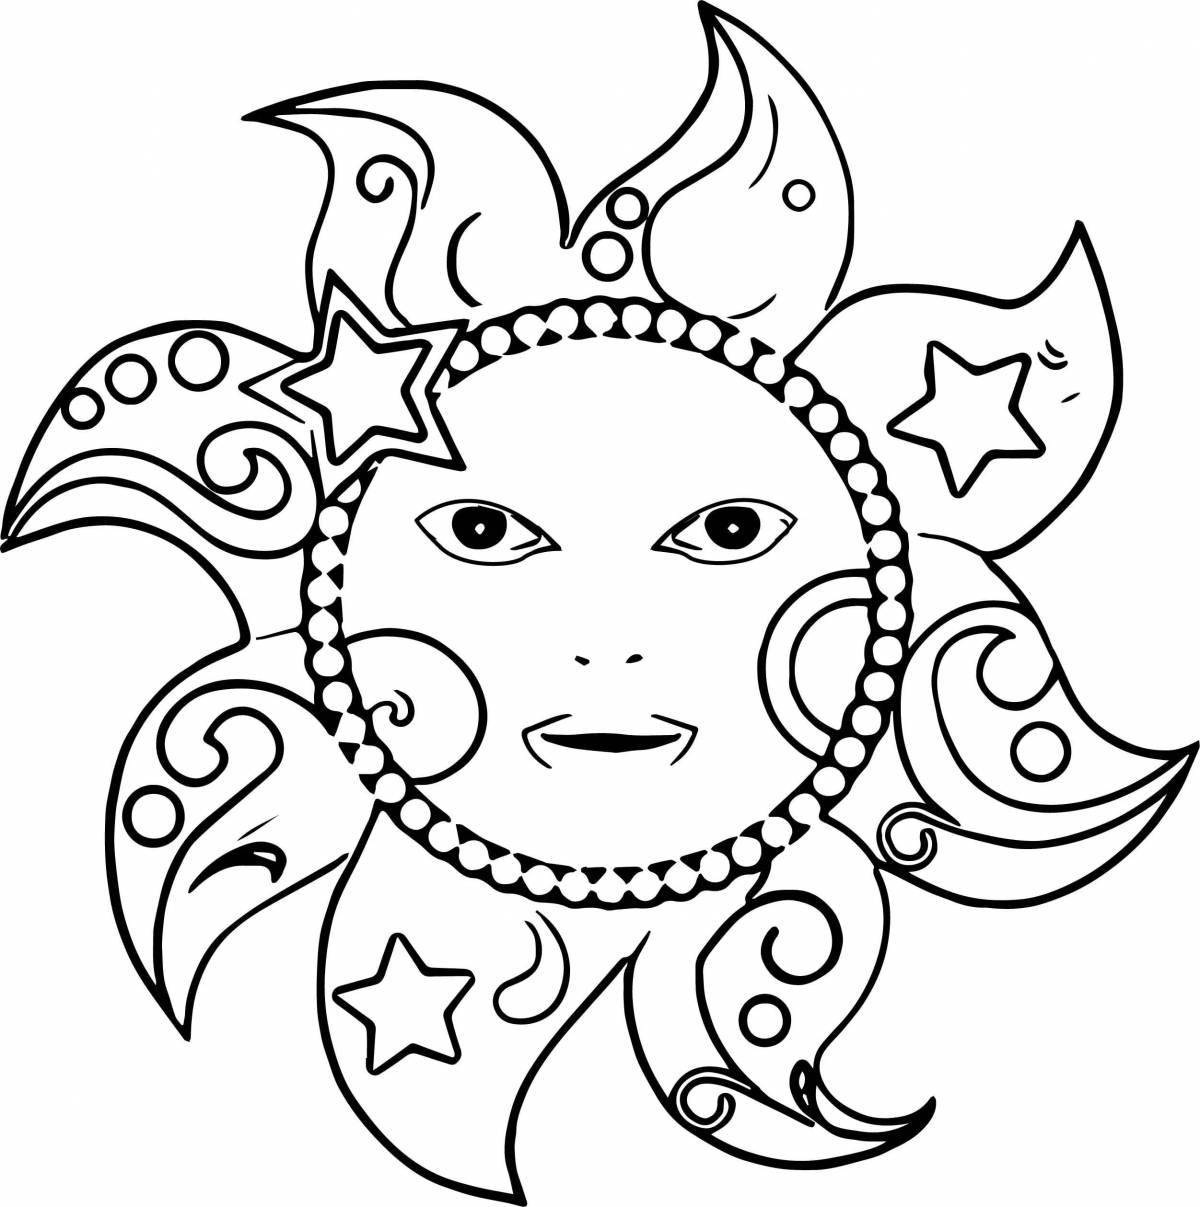 Gorgeous Carnival Sun coloring page